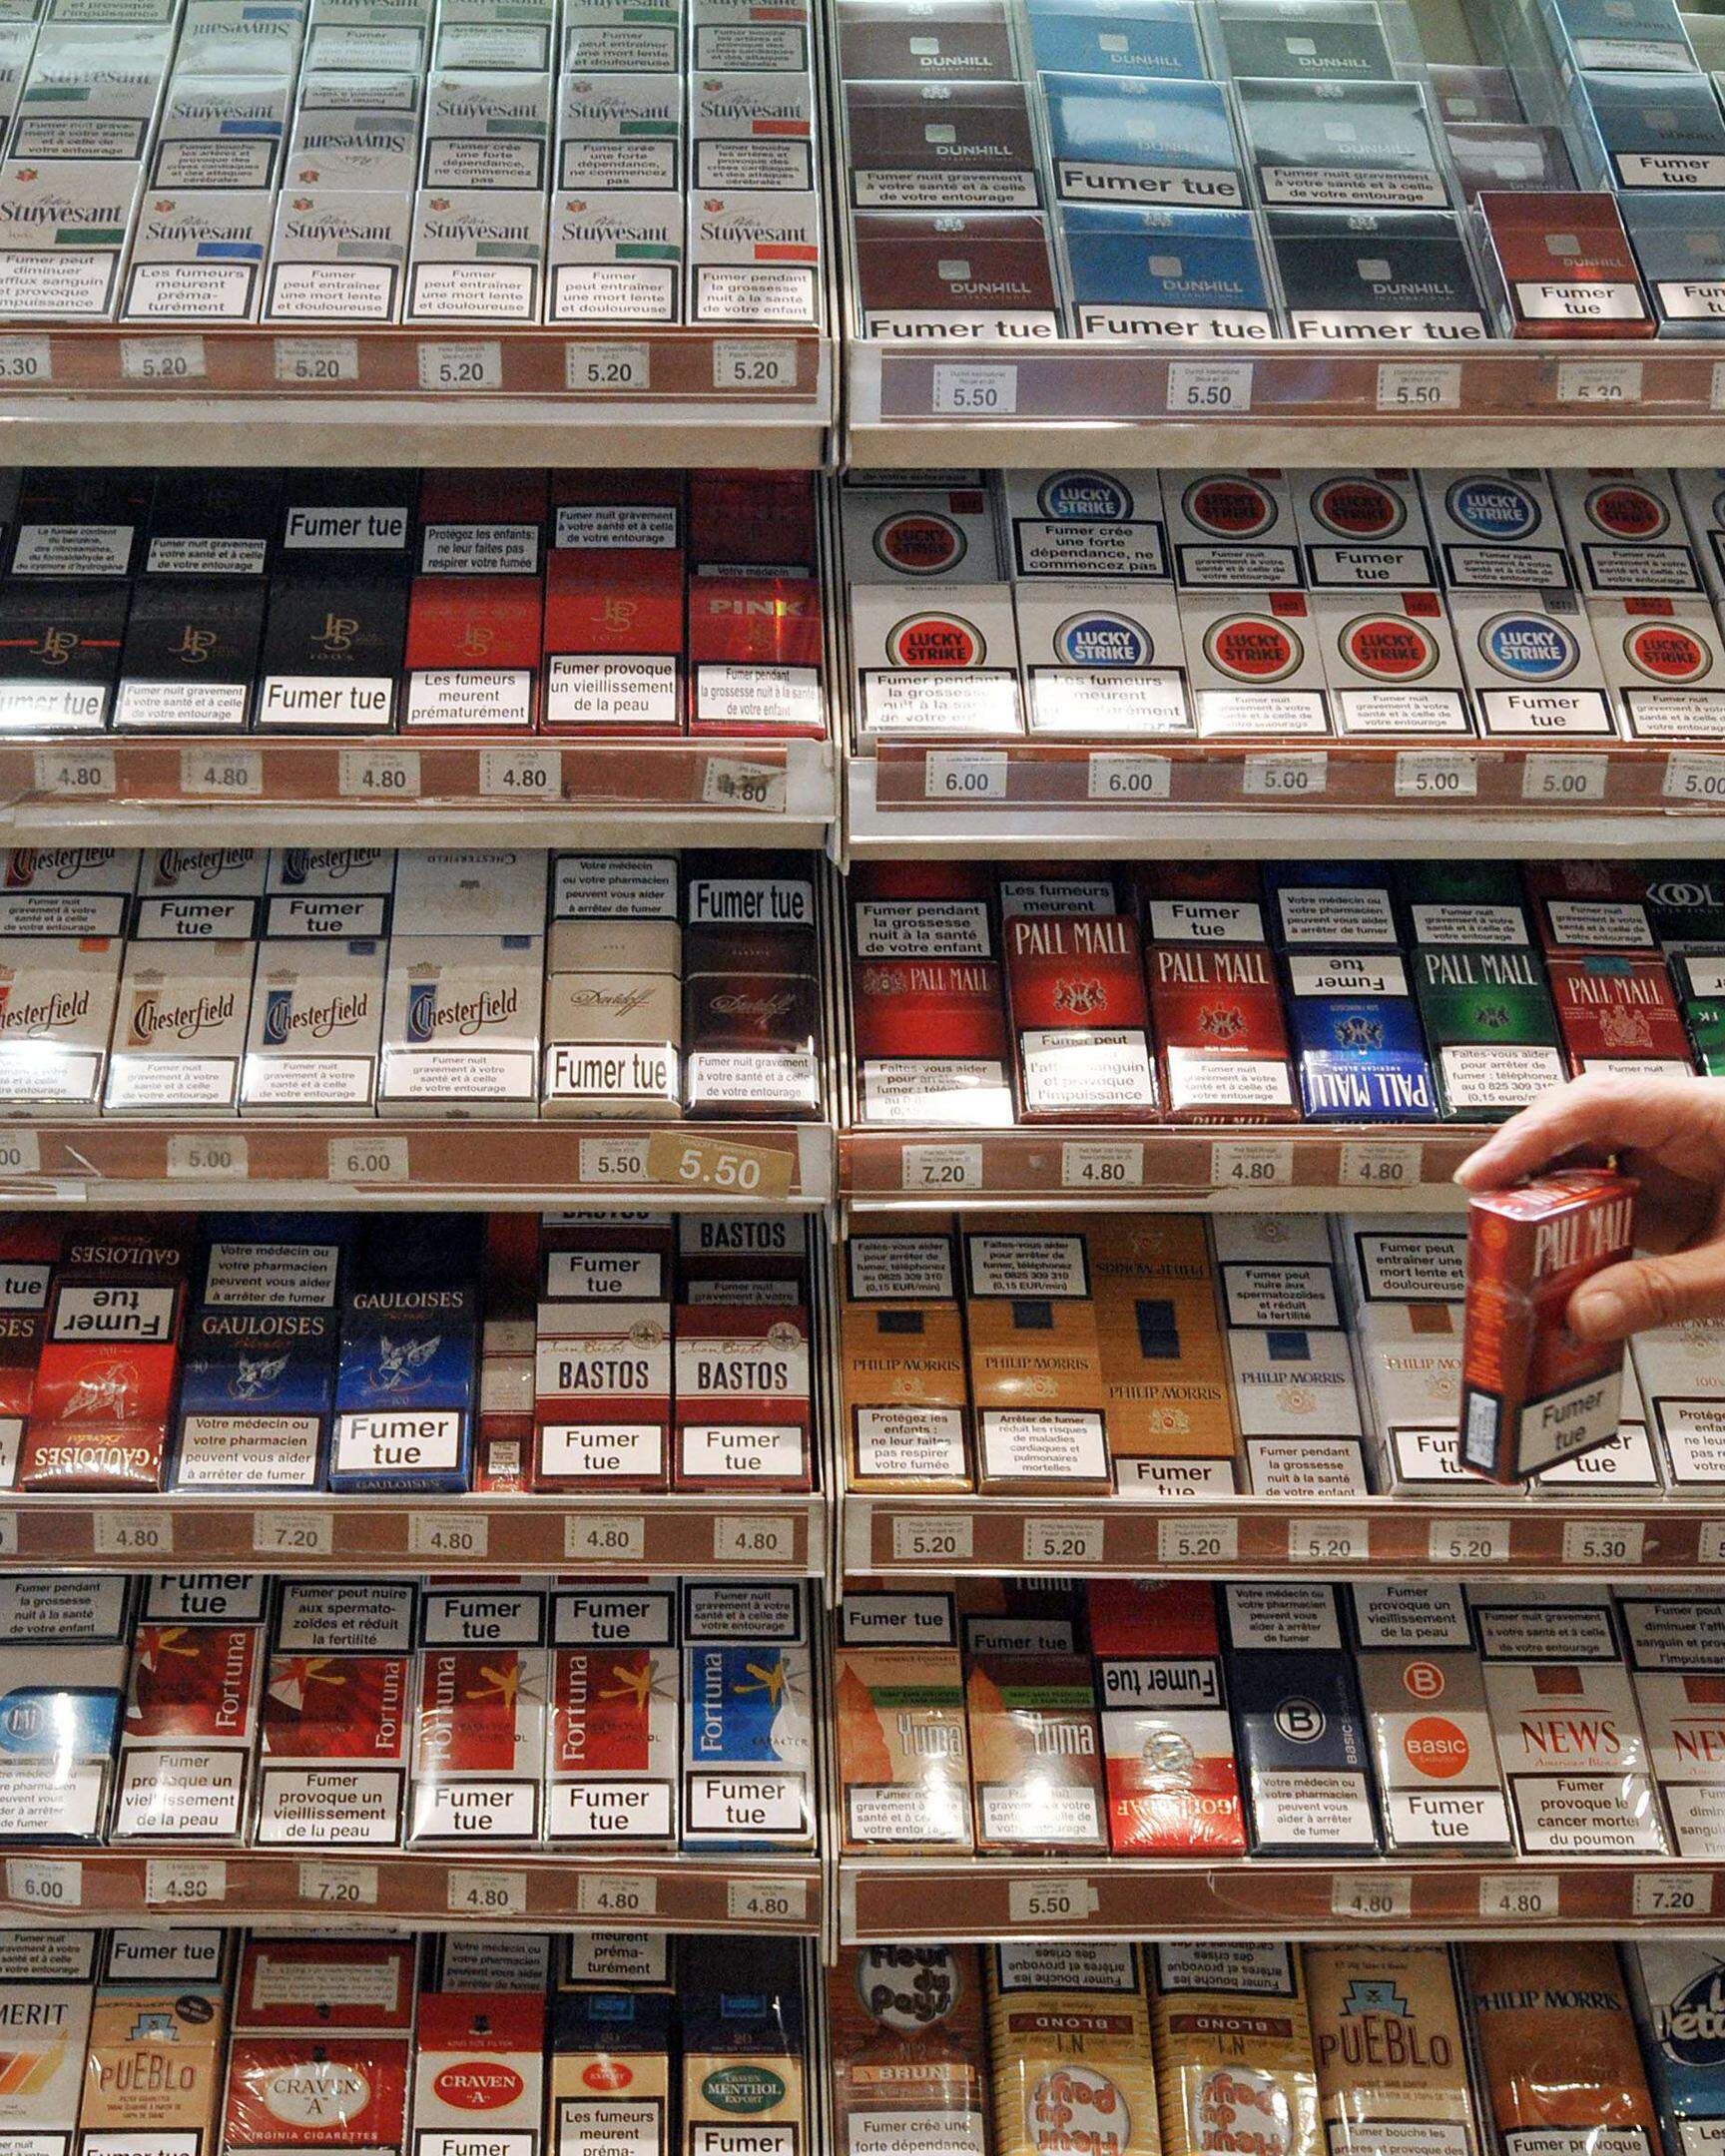 (FILES) -- A file photo taken on Octobre 14, 2009 in Bordeaux shows a tobacconist holding a pack of cigarettes. Belgium tobacco sales have soared to record heights this year as cheap cigarettes and tobacco lure discount-seeking smokers from Britain and France, the daily Le Soir said on November 12, 2011. As health experts complained that Belgium's cheap tobacco goods fanned cancer, Le Soir, citing exclusive data from the country's finance ministry, said cigarette sales leapt 19 percent in the first nine months of the year though the national tobacco federation said domestic sales were sliding.   AFP PHOTO / PIERRE ANDRIEU